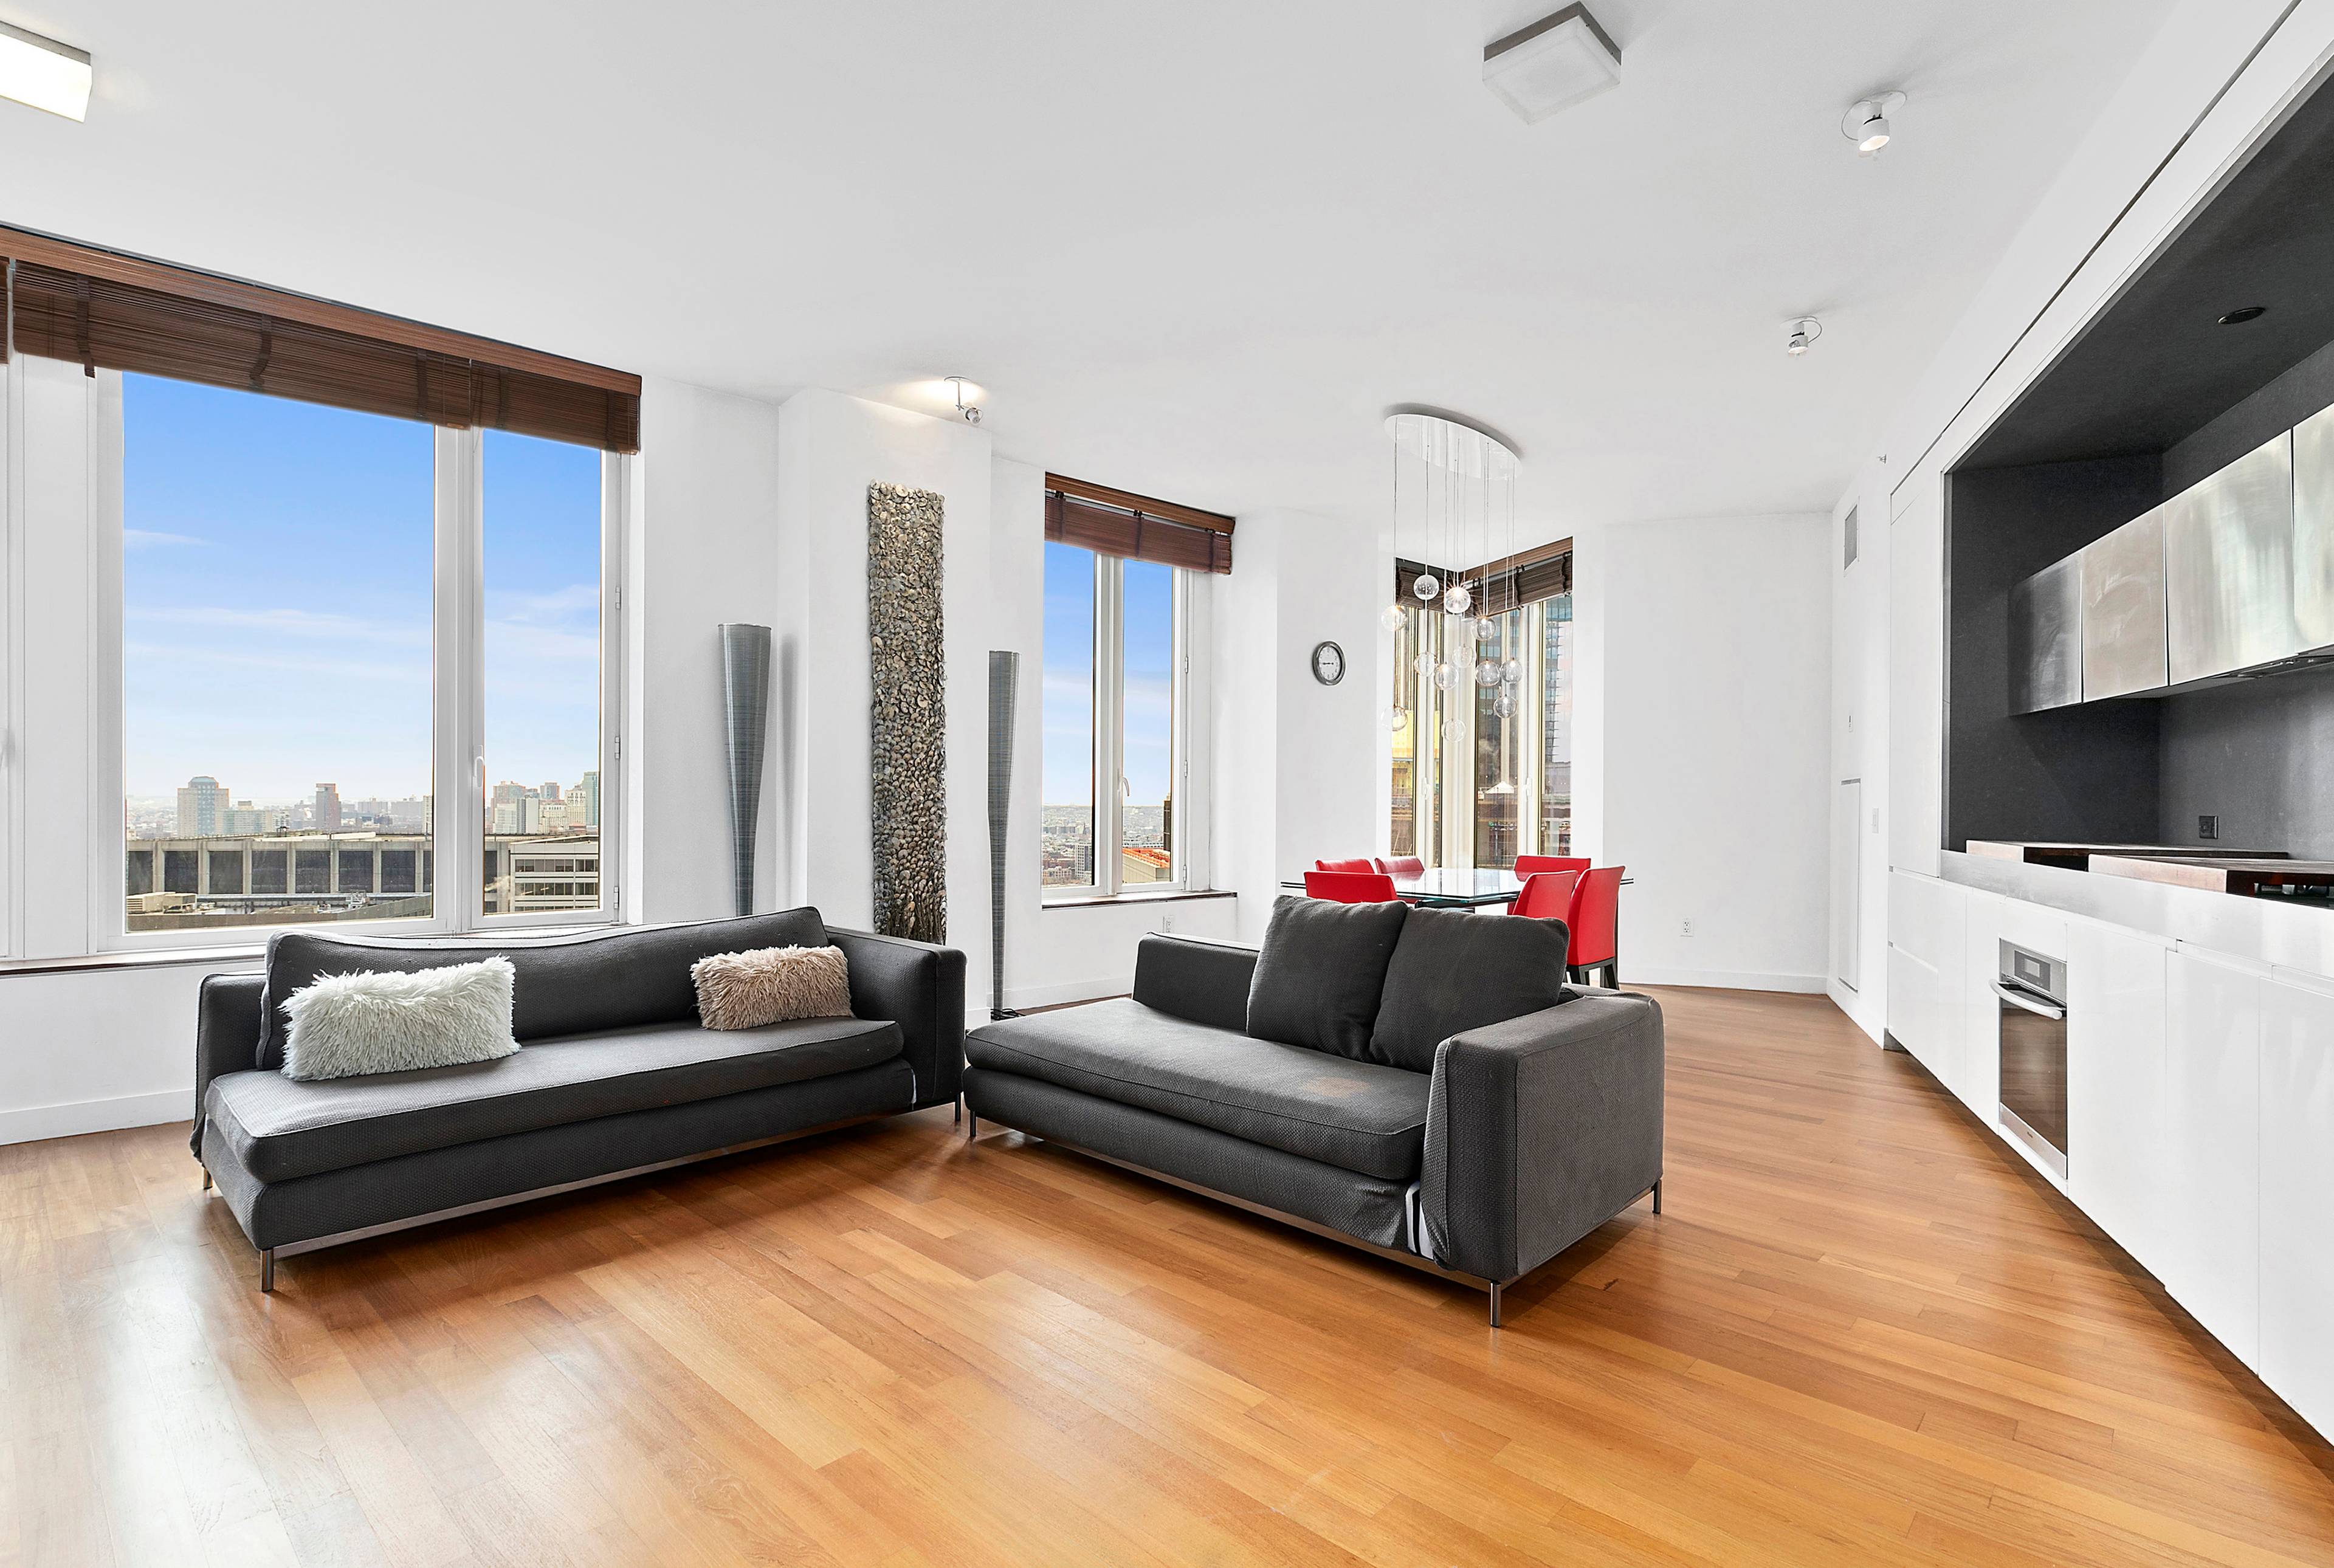 The generous floorplan, immaculate finishes furnishings PLUS the views affords this home a place among the rare finds in Manhattan.